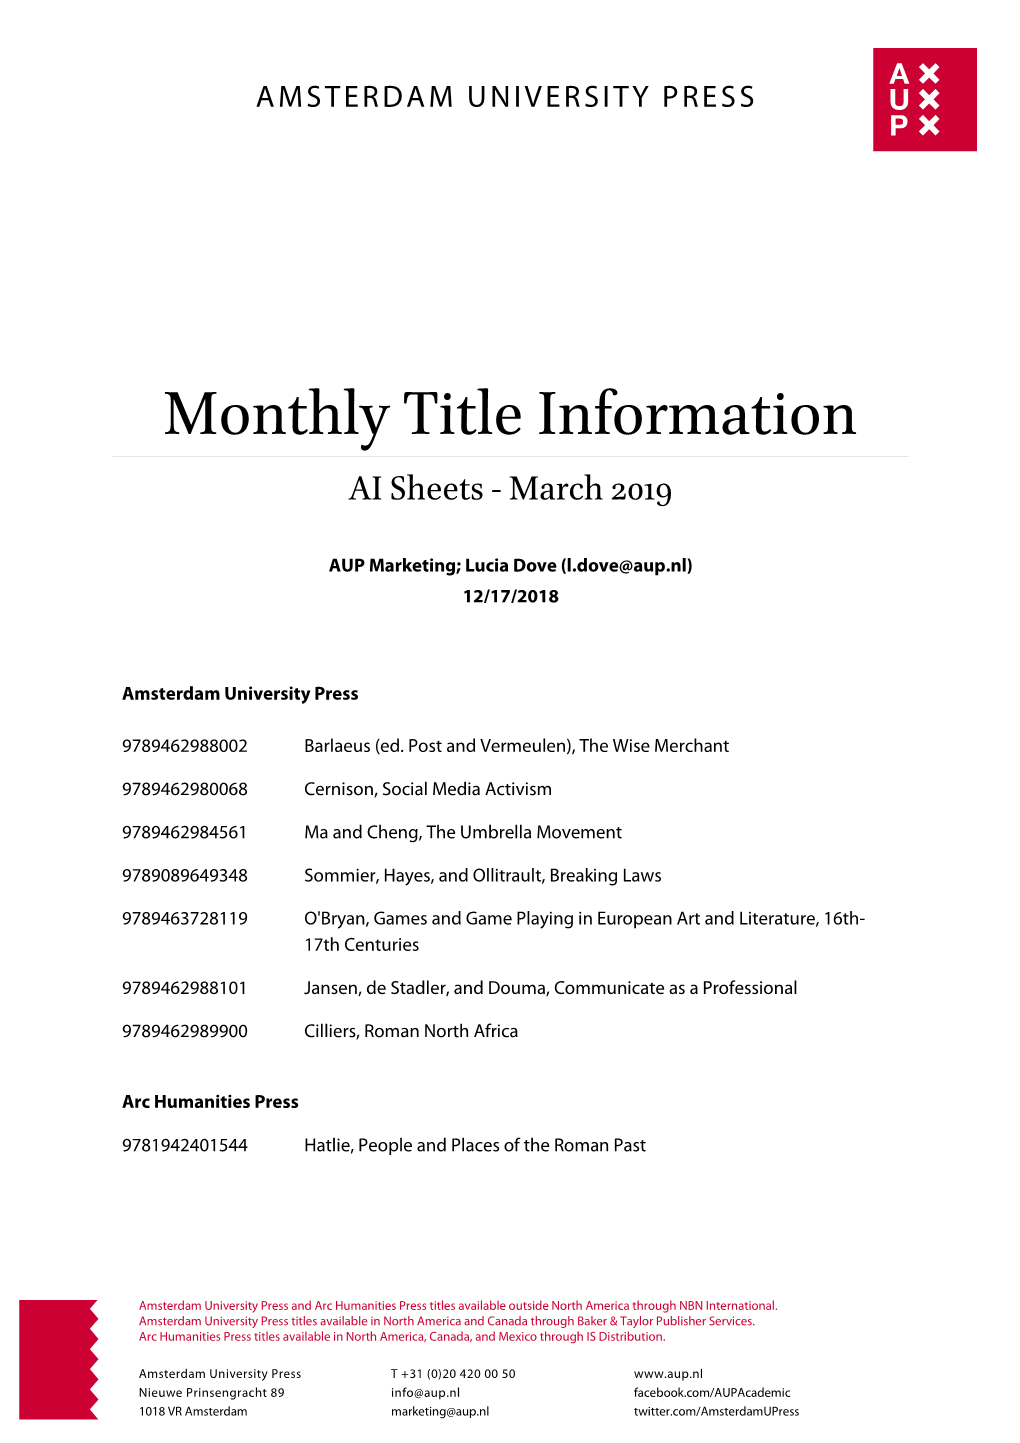 Monthly Title Information Cover Sheet March 2019